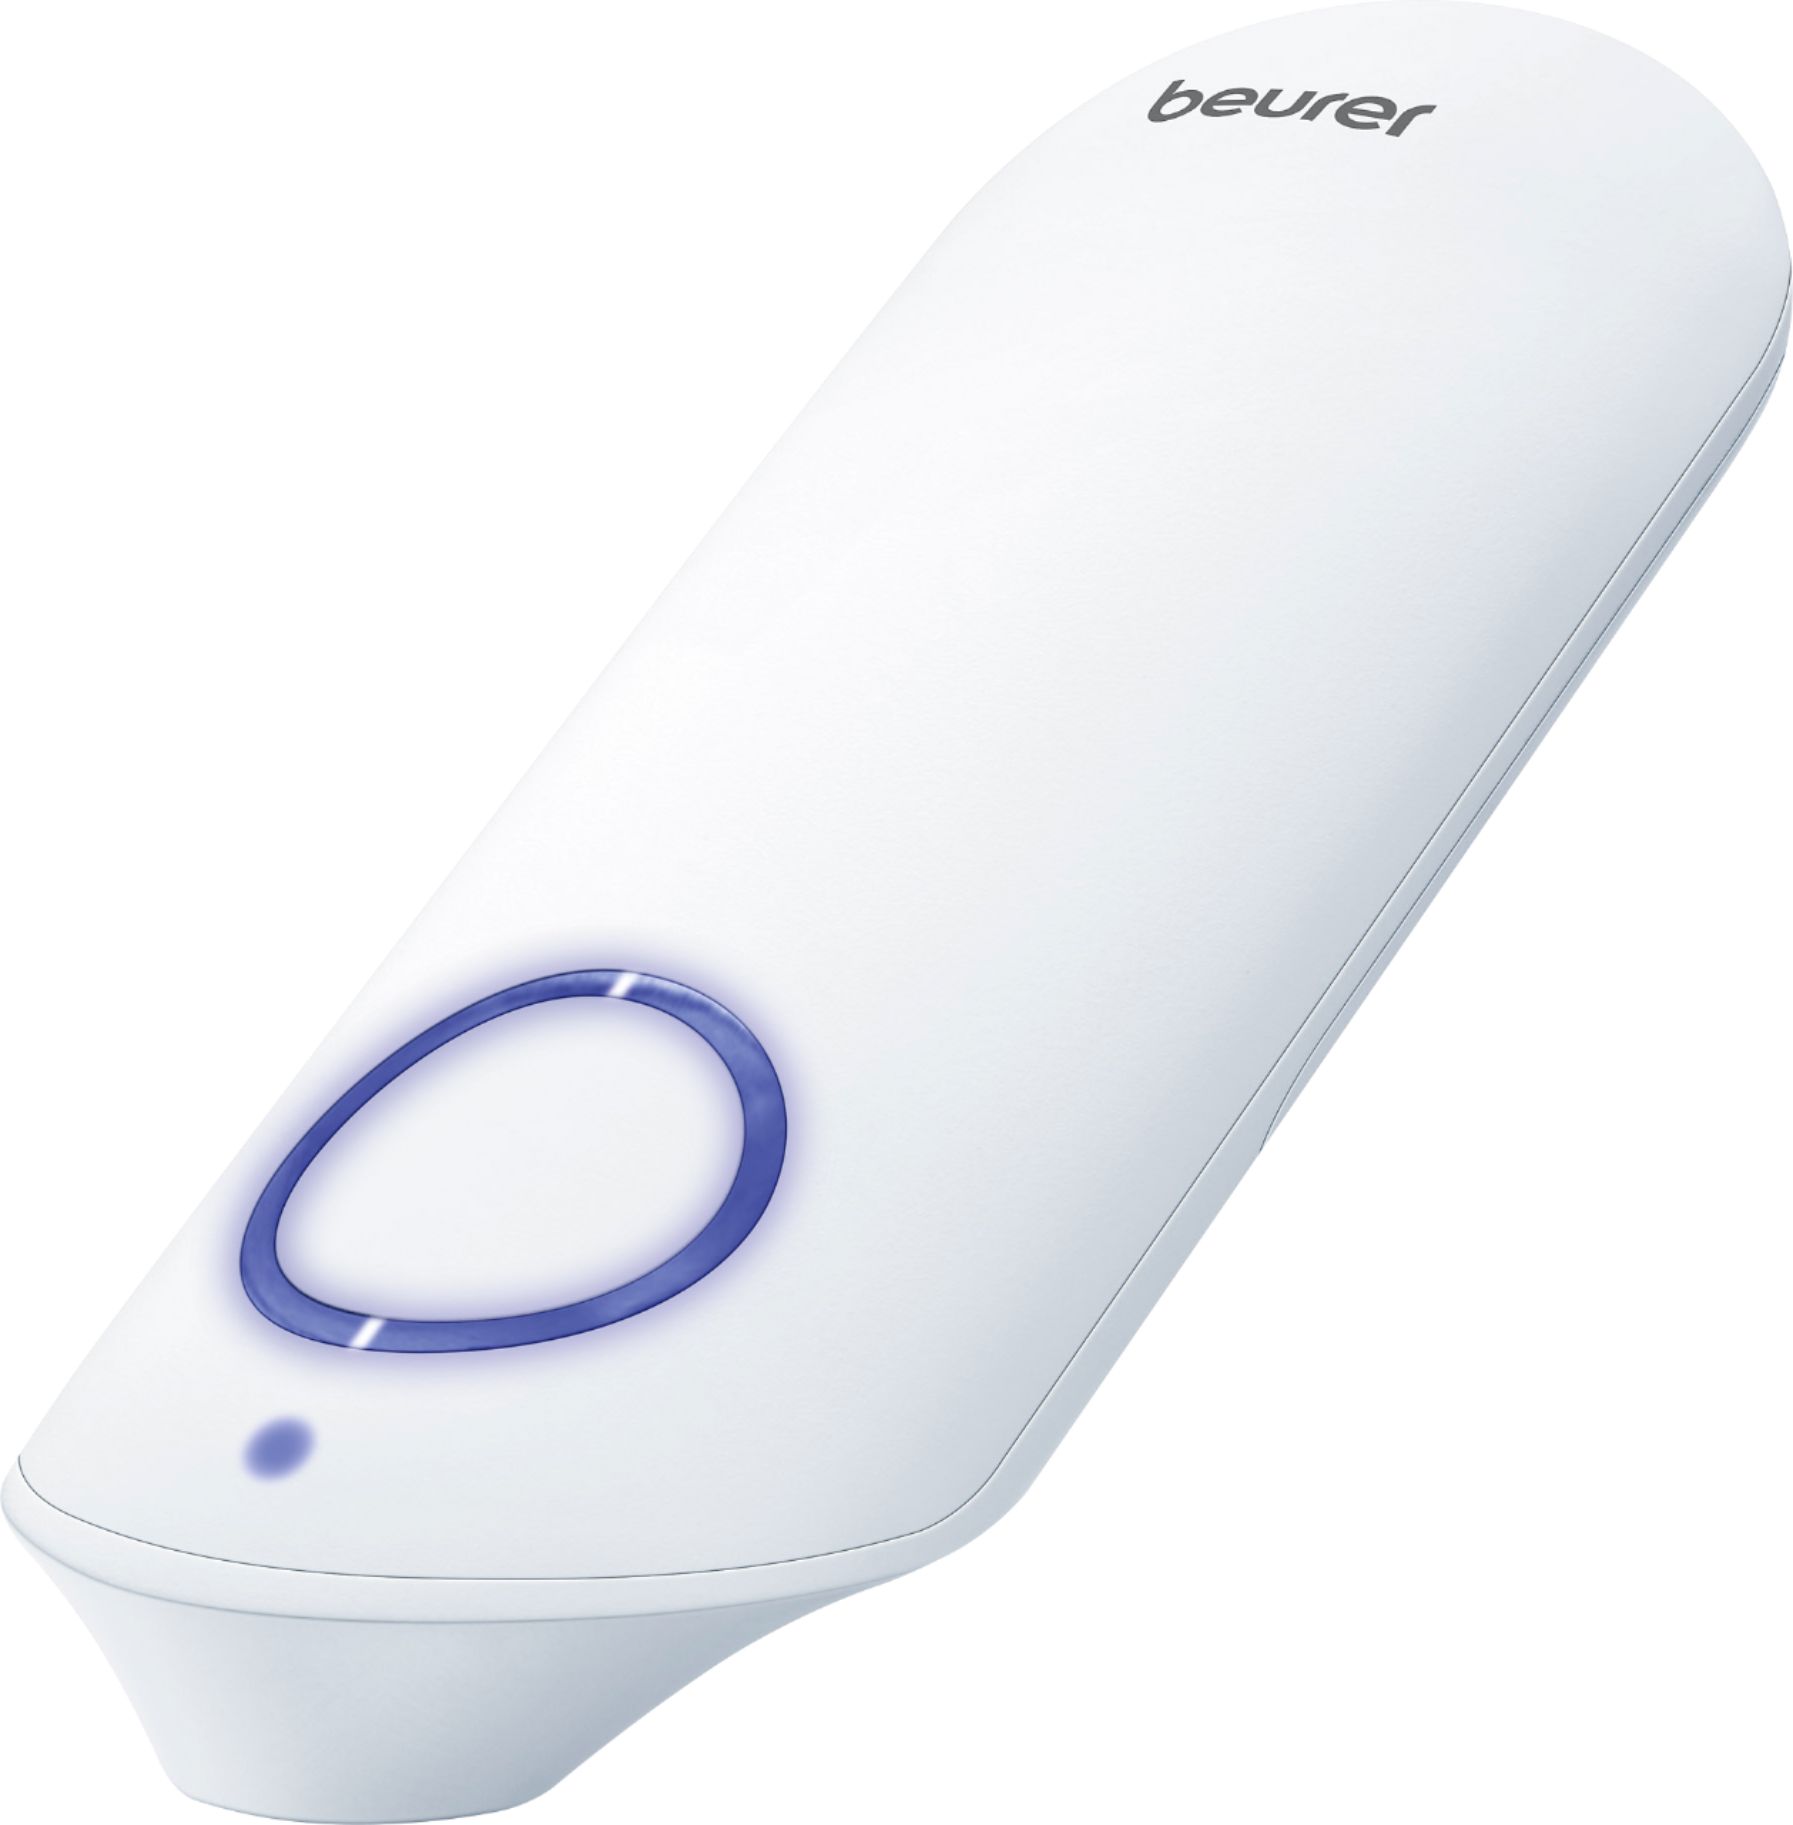 Beurer – Insect Bite Healer – white – Just $19.99 at Best Buy